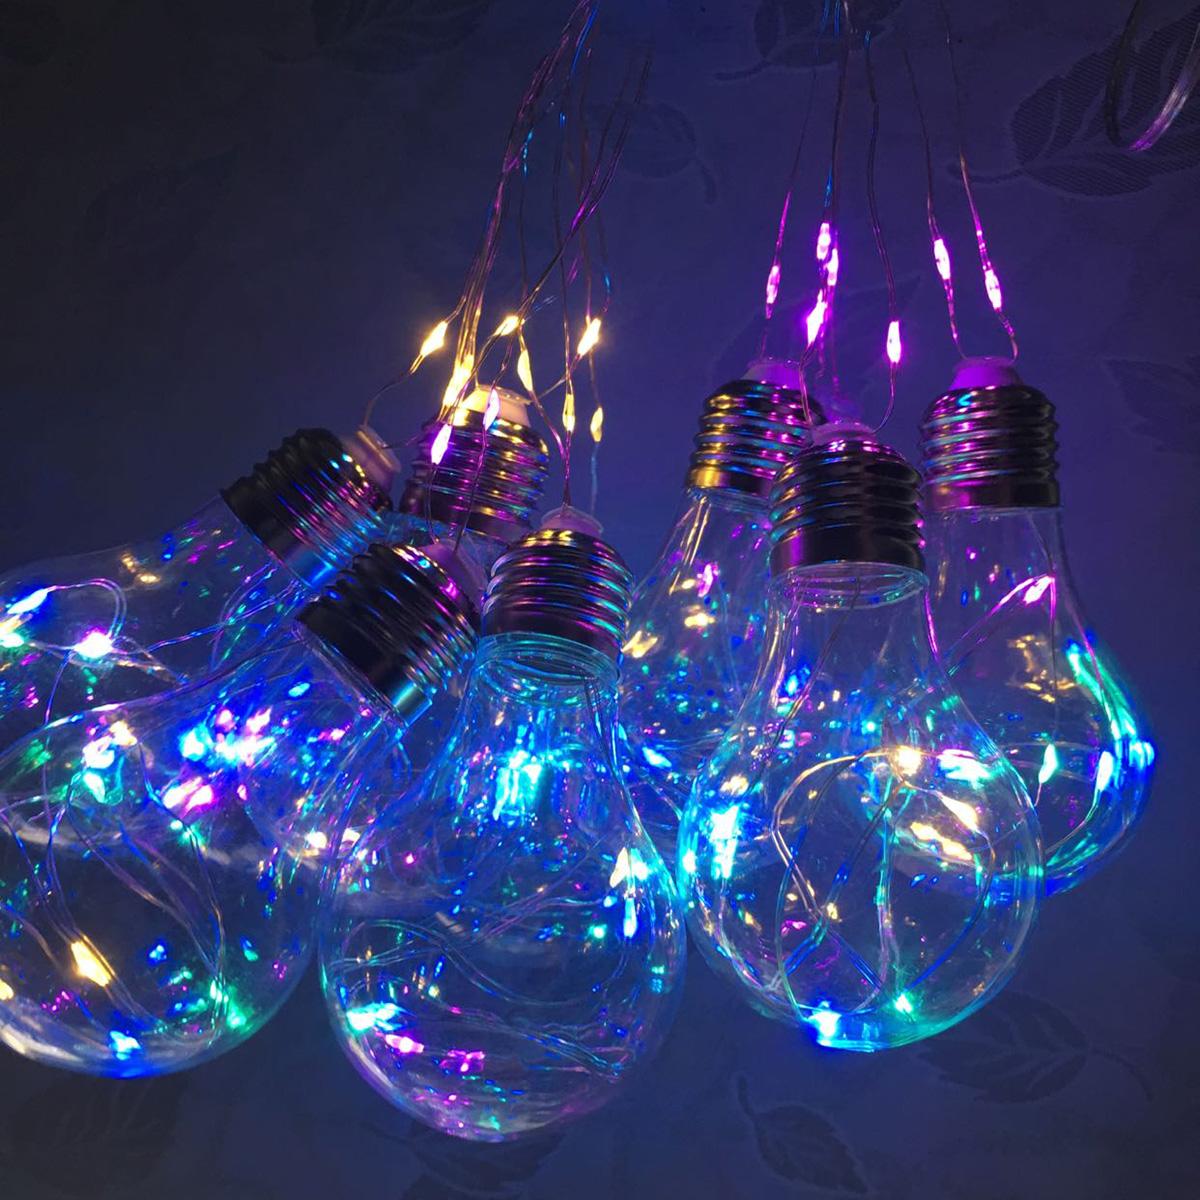 10-Bulbs-Light-Hanging-LED-String-Light-Firefly-Party-Wedding-Home-Decoration-Romantic-1339196-4